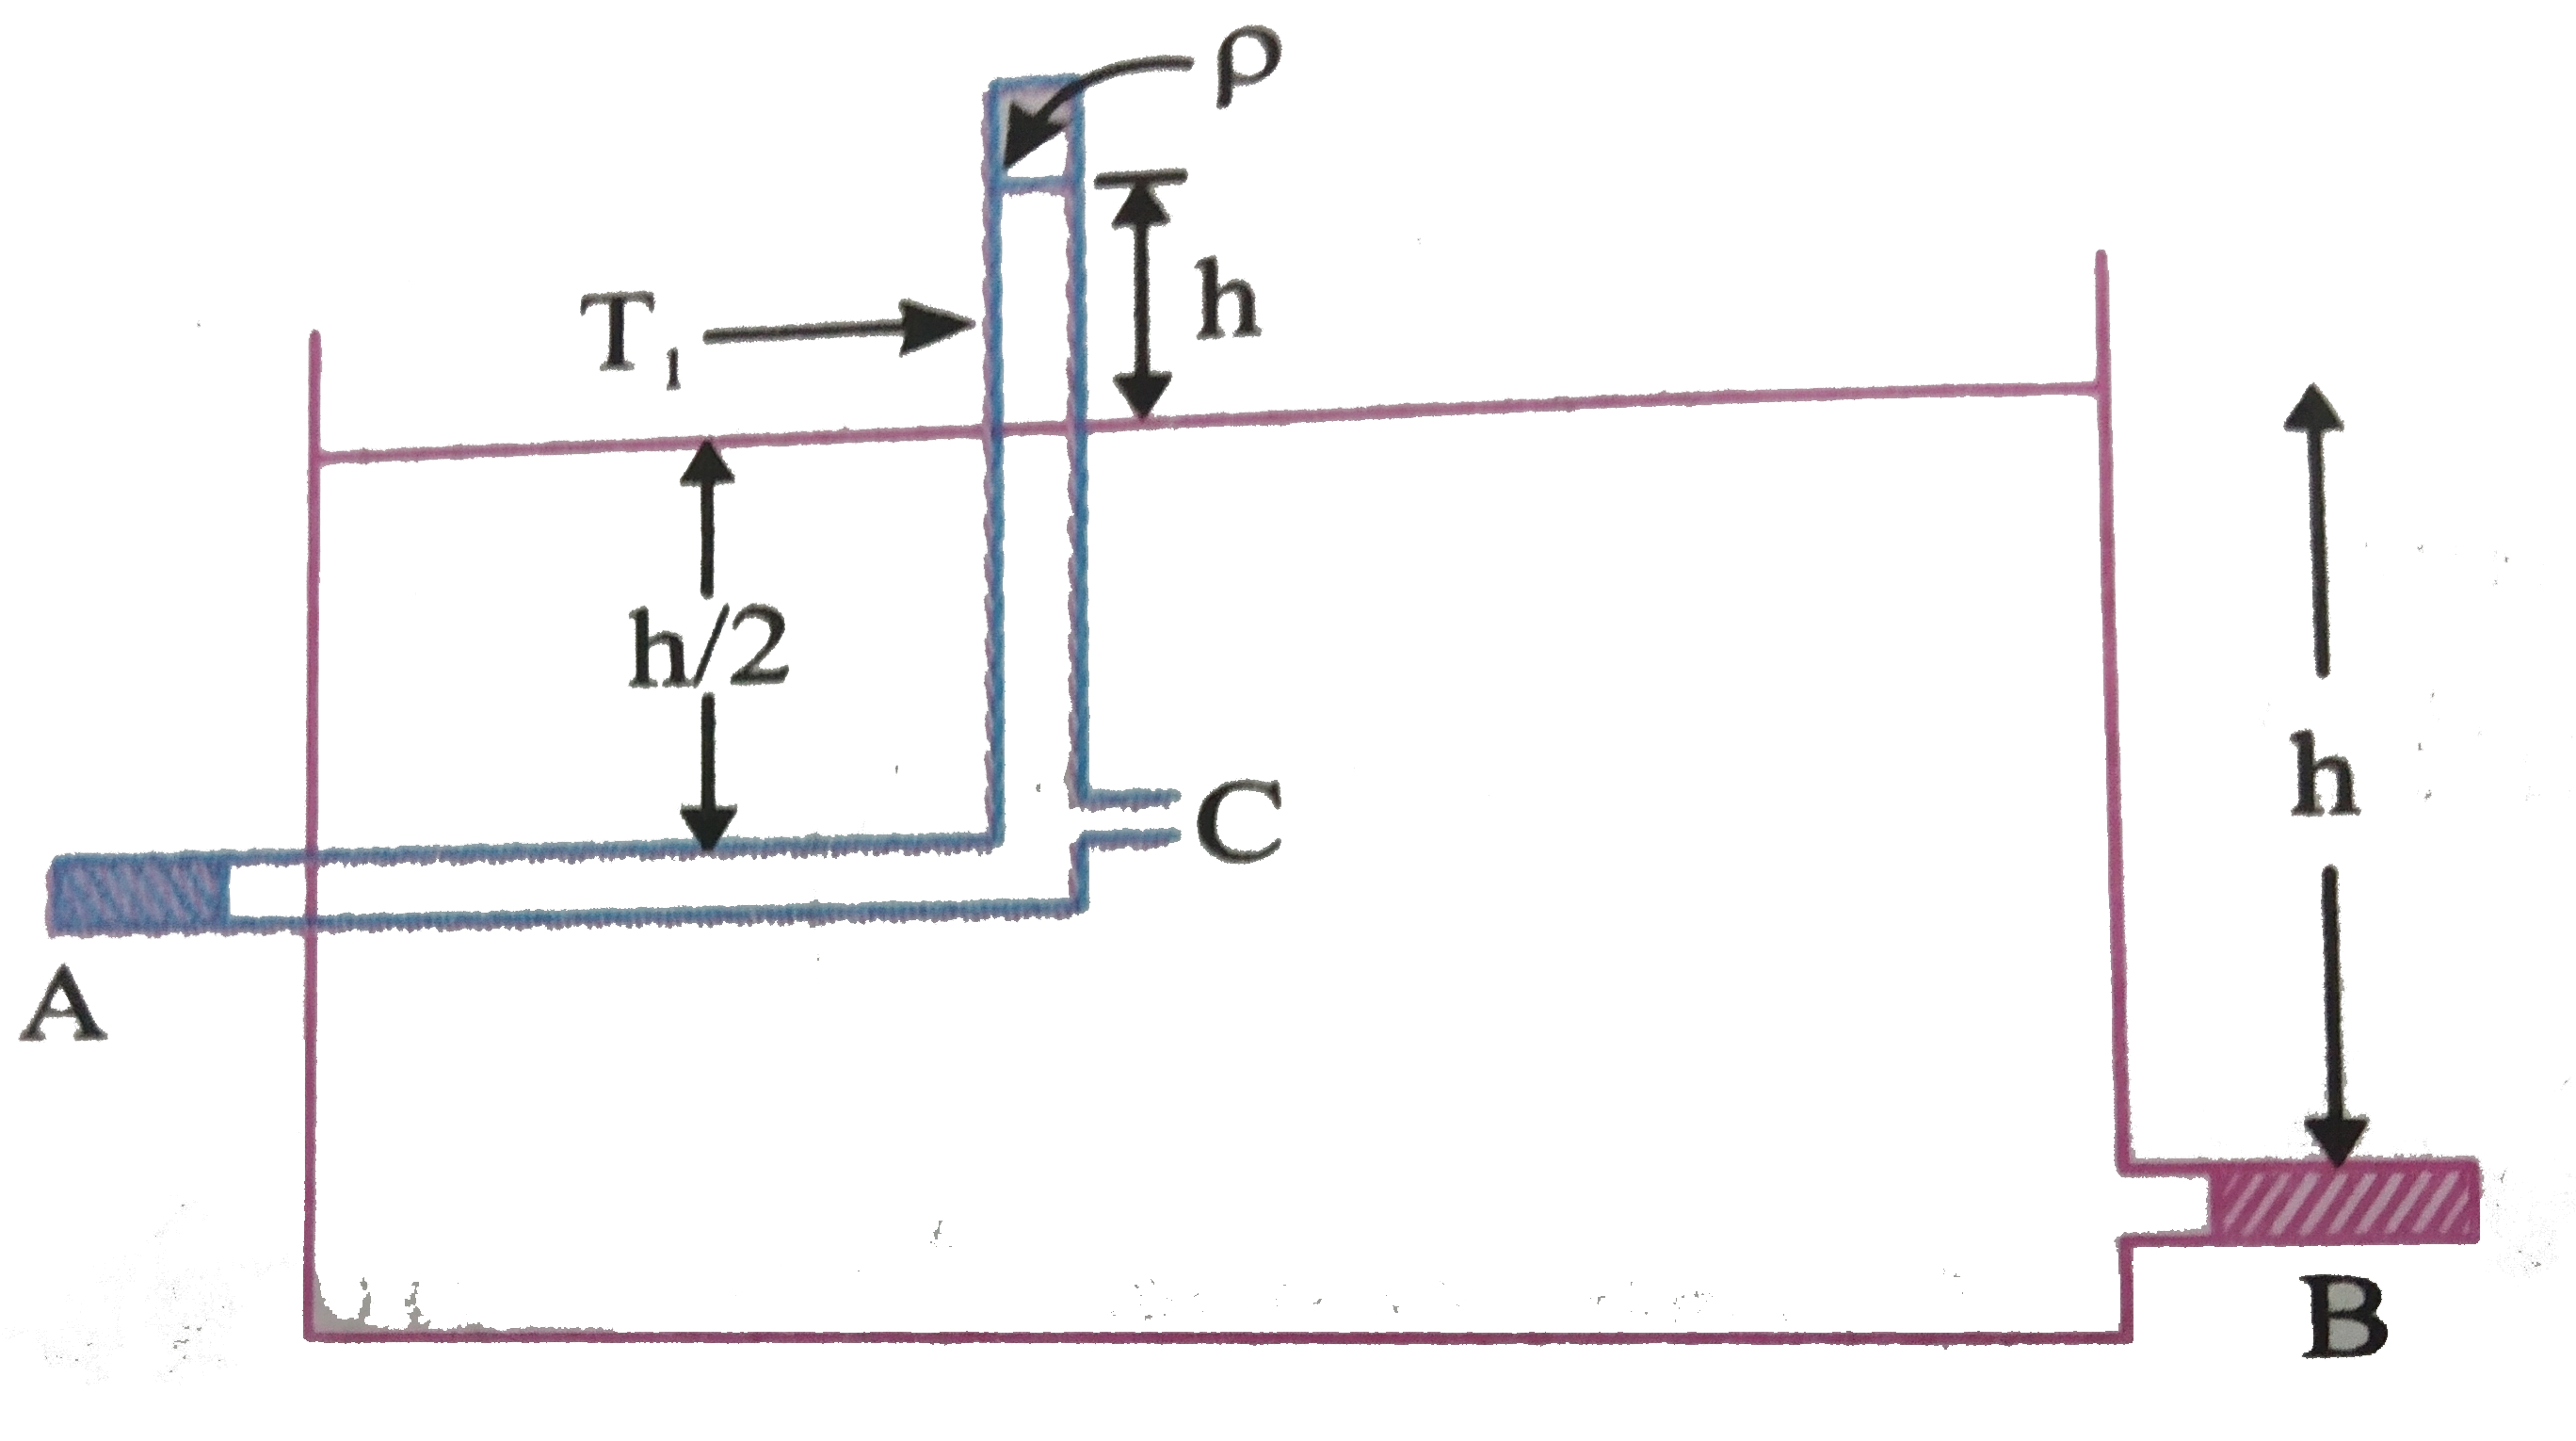 The cross-sectional areas of a tube T(1) and the hole in the vessel at B are a and a//2 respectively. There is a hole in the tube at C (at the level of A) through which liquid in the vessel rises by a height h in the tube. The other liquid heights are shown  in the diagram. The plugs at A and B are removed simultaneously. How much horizontal force is required to keep vessel in equilibrium if p is the pressure in the tube and p(0) is the atmospheric pressure? Hole C is closed when plugs are removed.